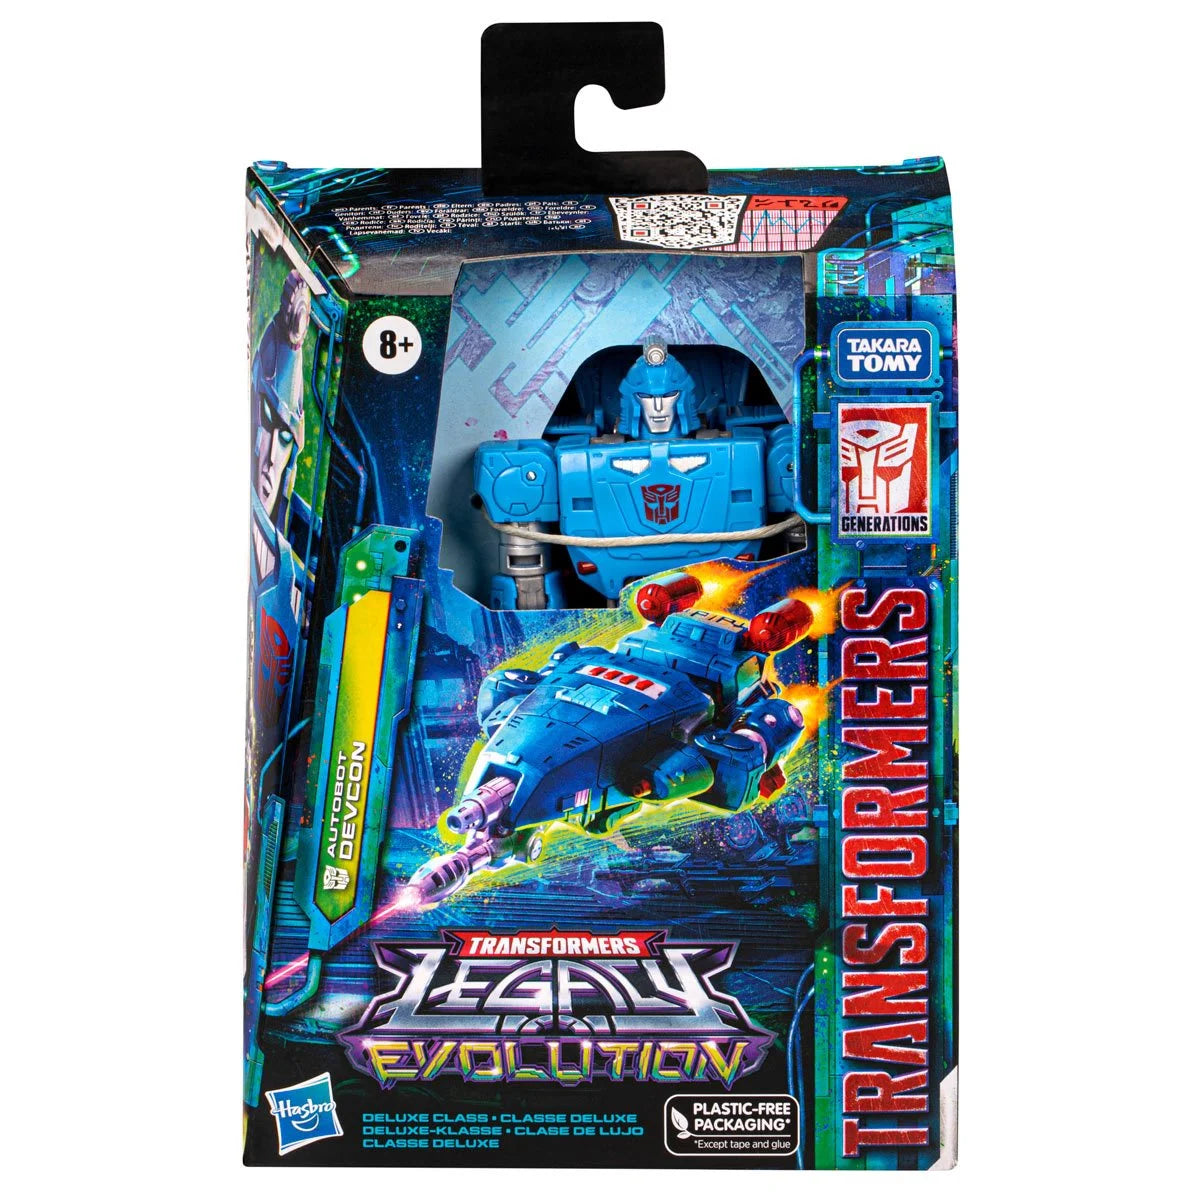 Transformers Generations Legacy Evolution Deluxe Devcon Action Figure Toy - Heretoserveyou